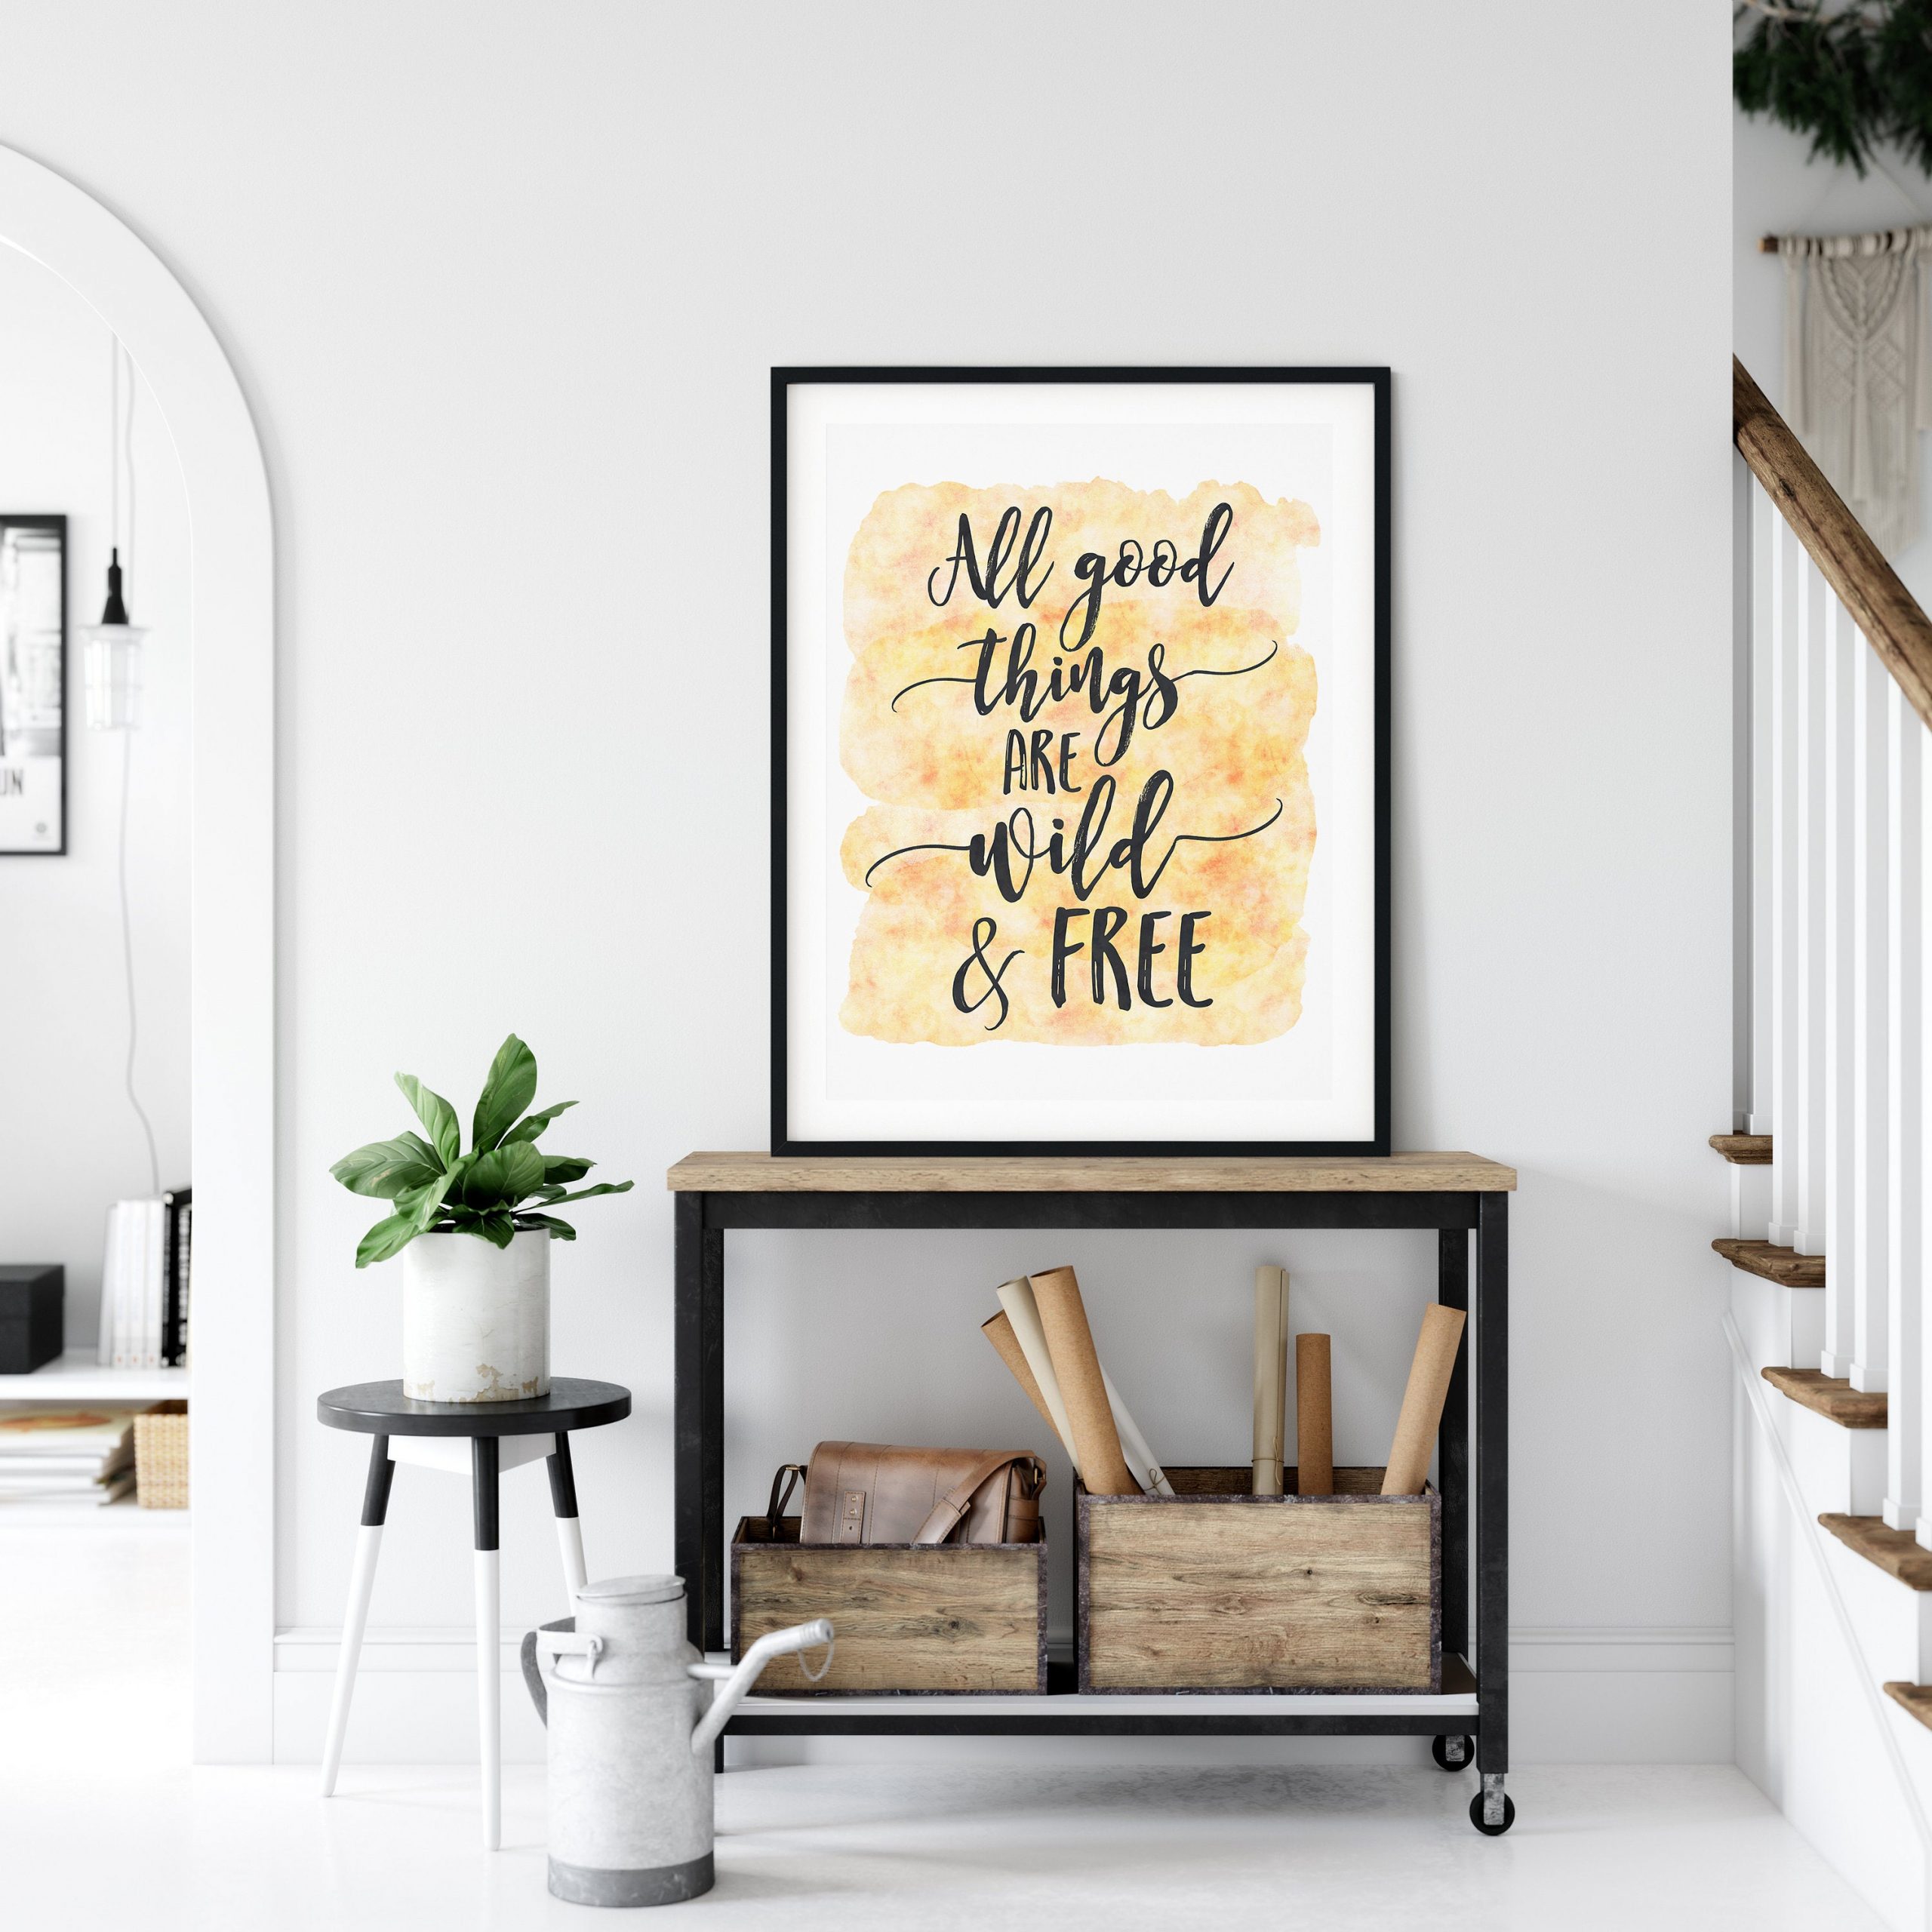 All Good Things Are Wild And Free, Nursery Print Wall Art, Inspirational Quotes